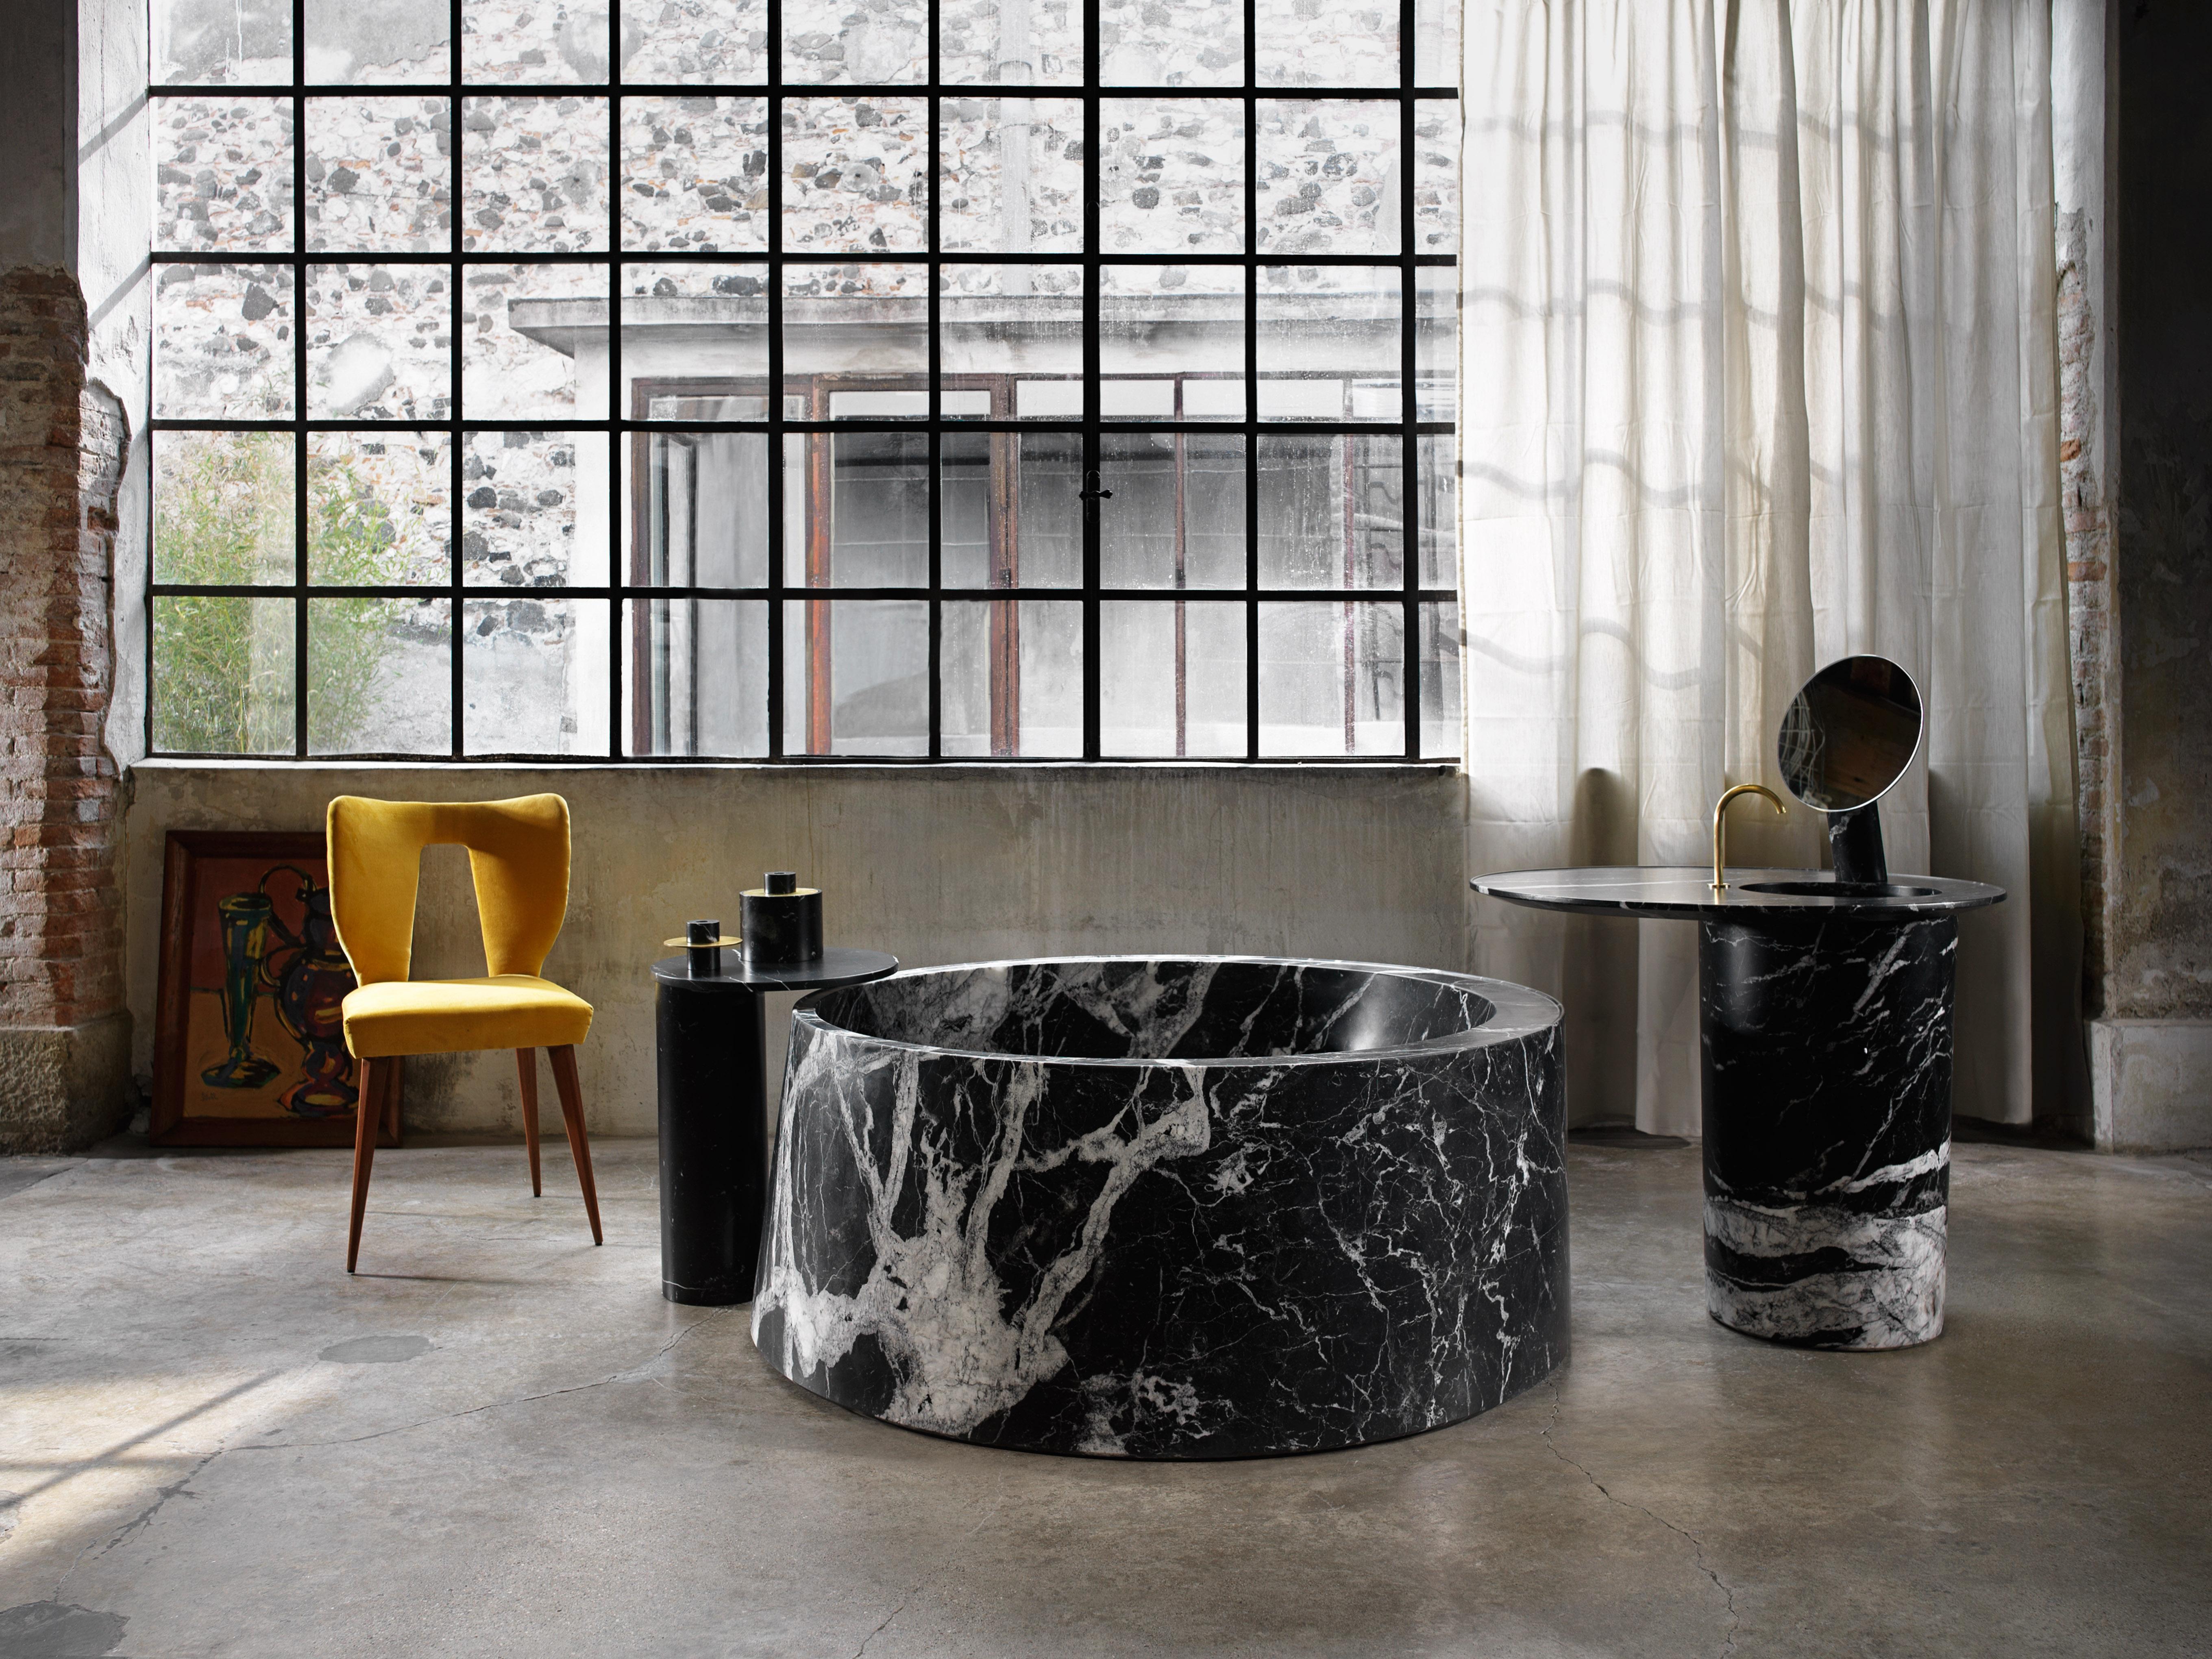 Desco Collection is the results of a renewed collaboration between Pibamarmi and the designer Vittorio Longheu. 
This work is defined by a peculiar set of elements, strongly characterized by circular shapes and minimal asymmetries in the volumes.